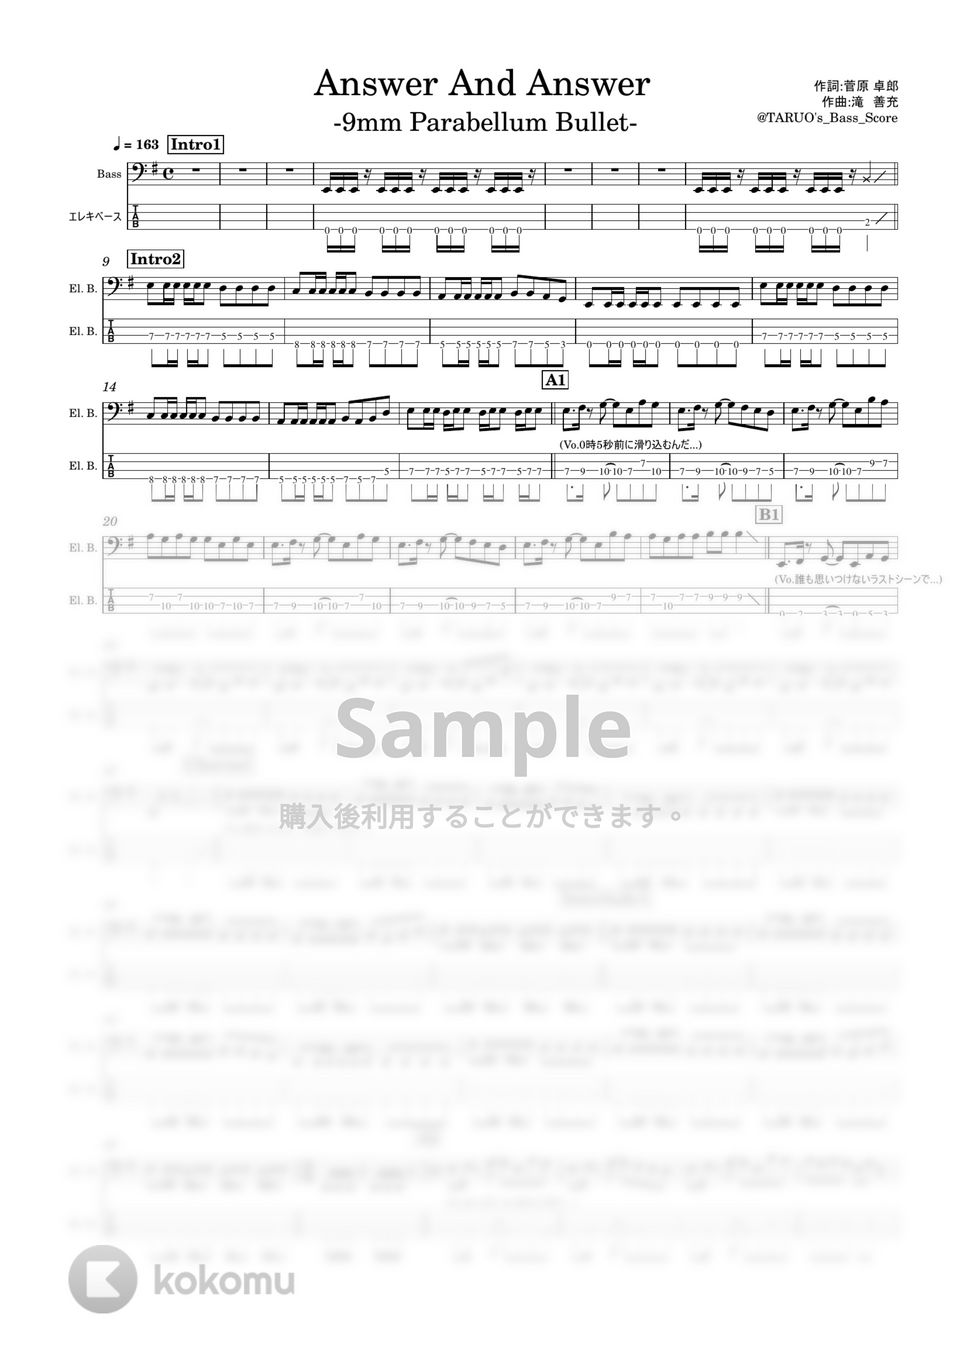 9mm Parabellum Bullet - Answer And Answer (ベース/9mm/TAB/) by TARUO's_Bass_Score